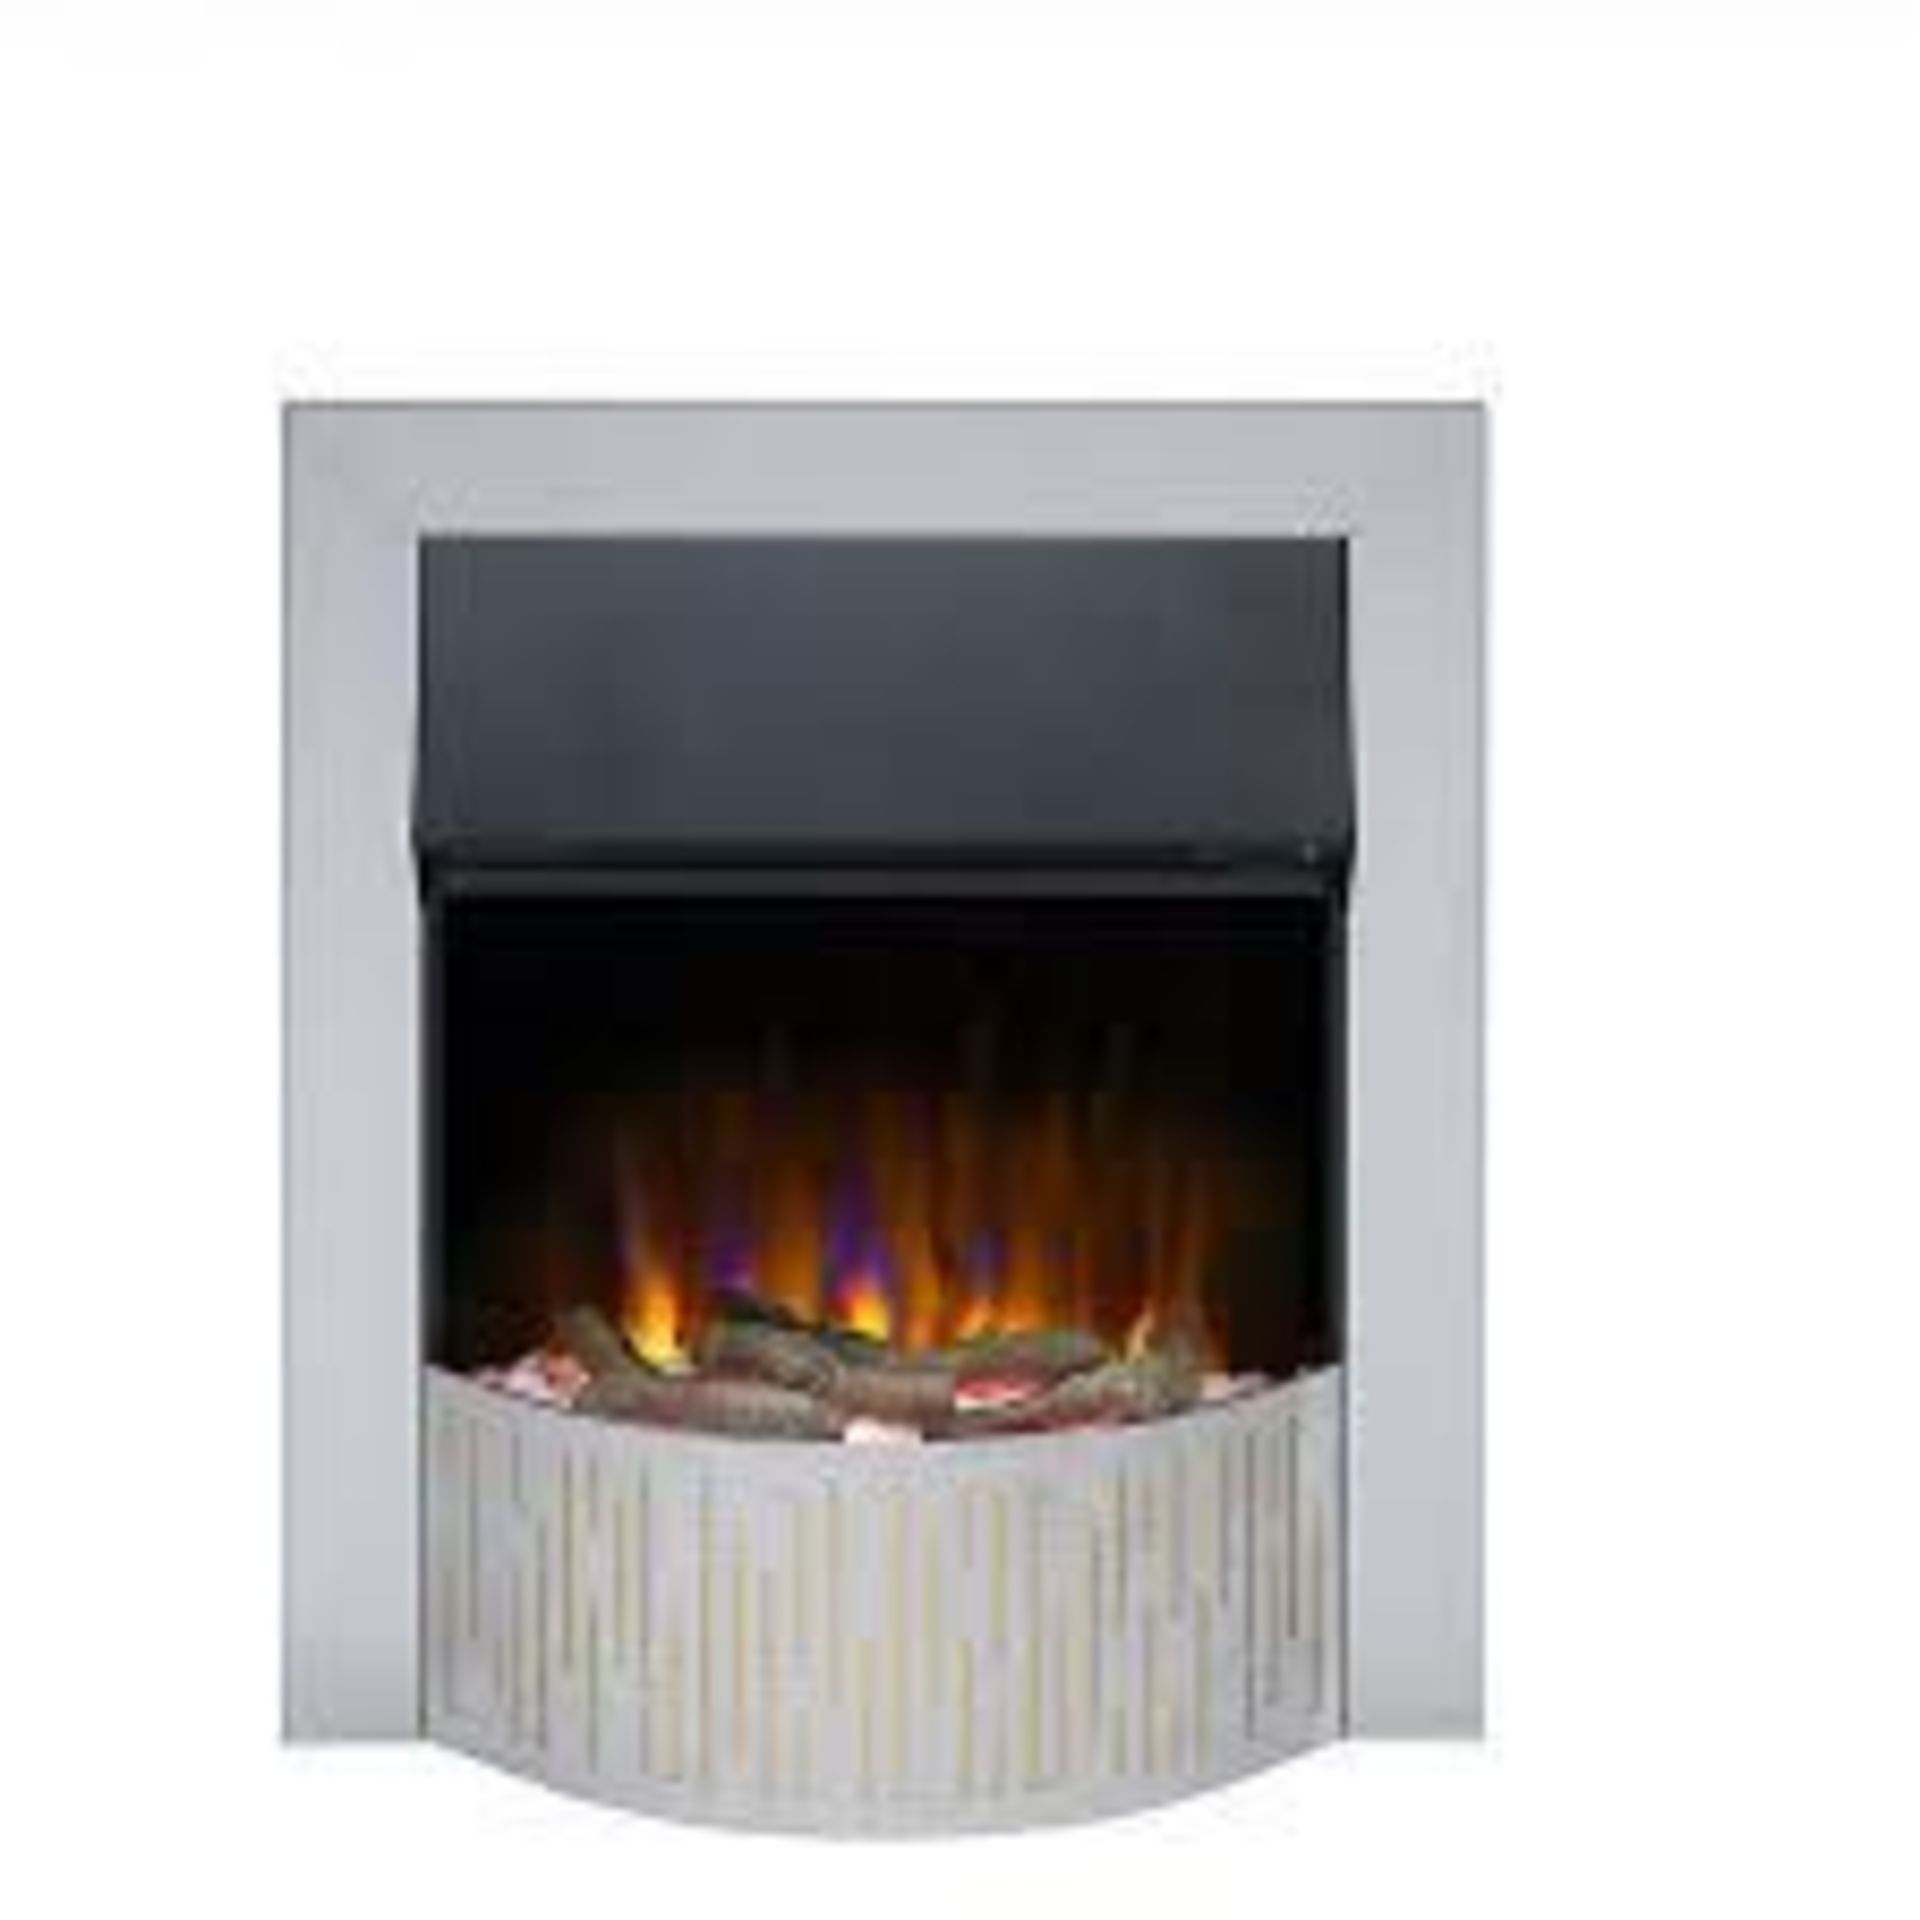 Dimplex Optiflame Gorstan 2kW Chrome effect Electric Fire. -R14.12. Modern chrome and brass effect